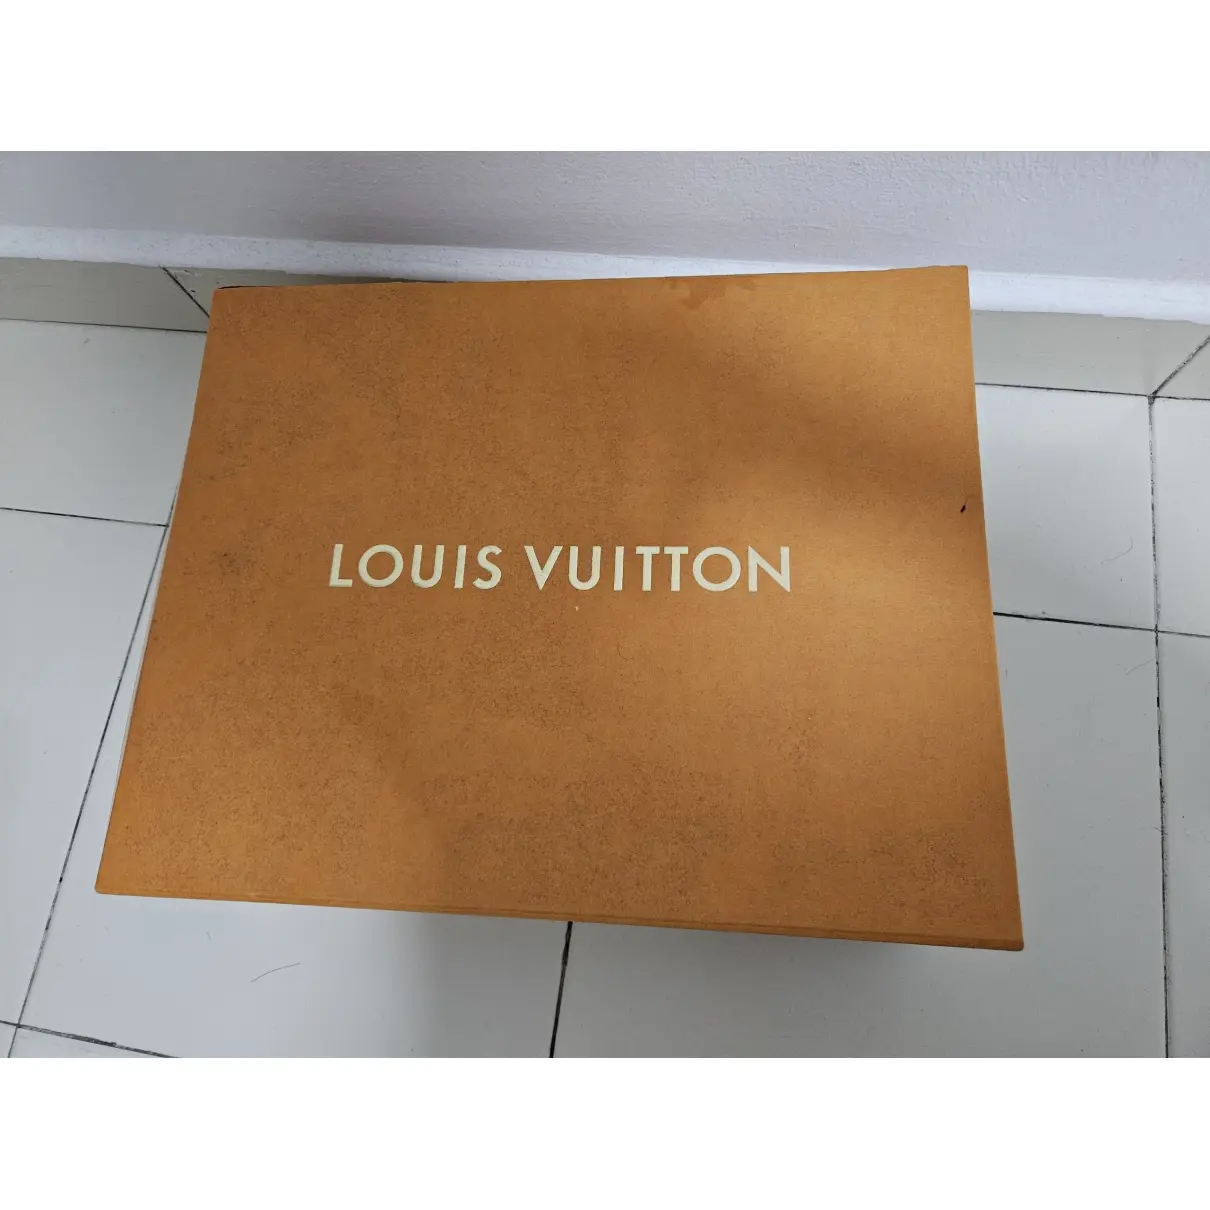 Trainer Sneaker Boot High leather high trainers Louis Vuitton